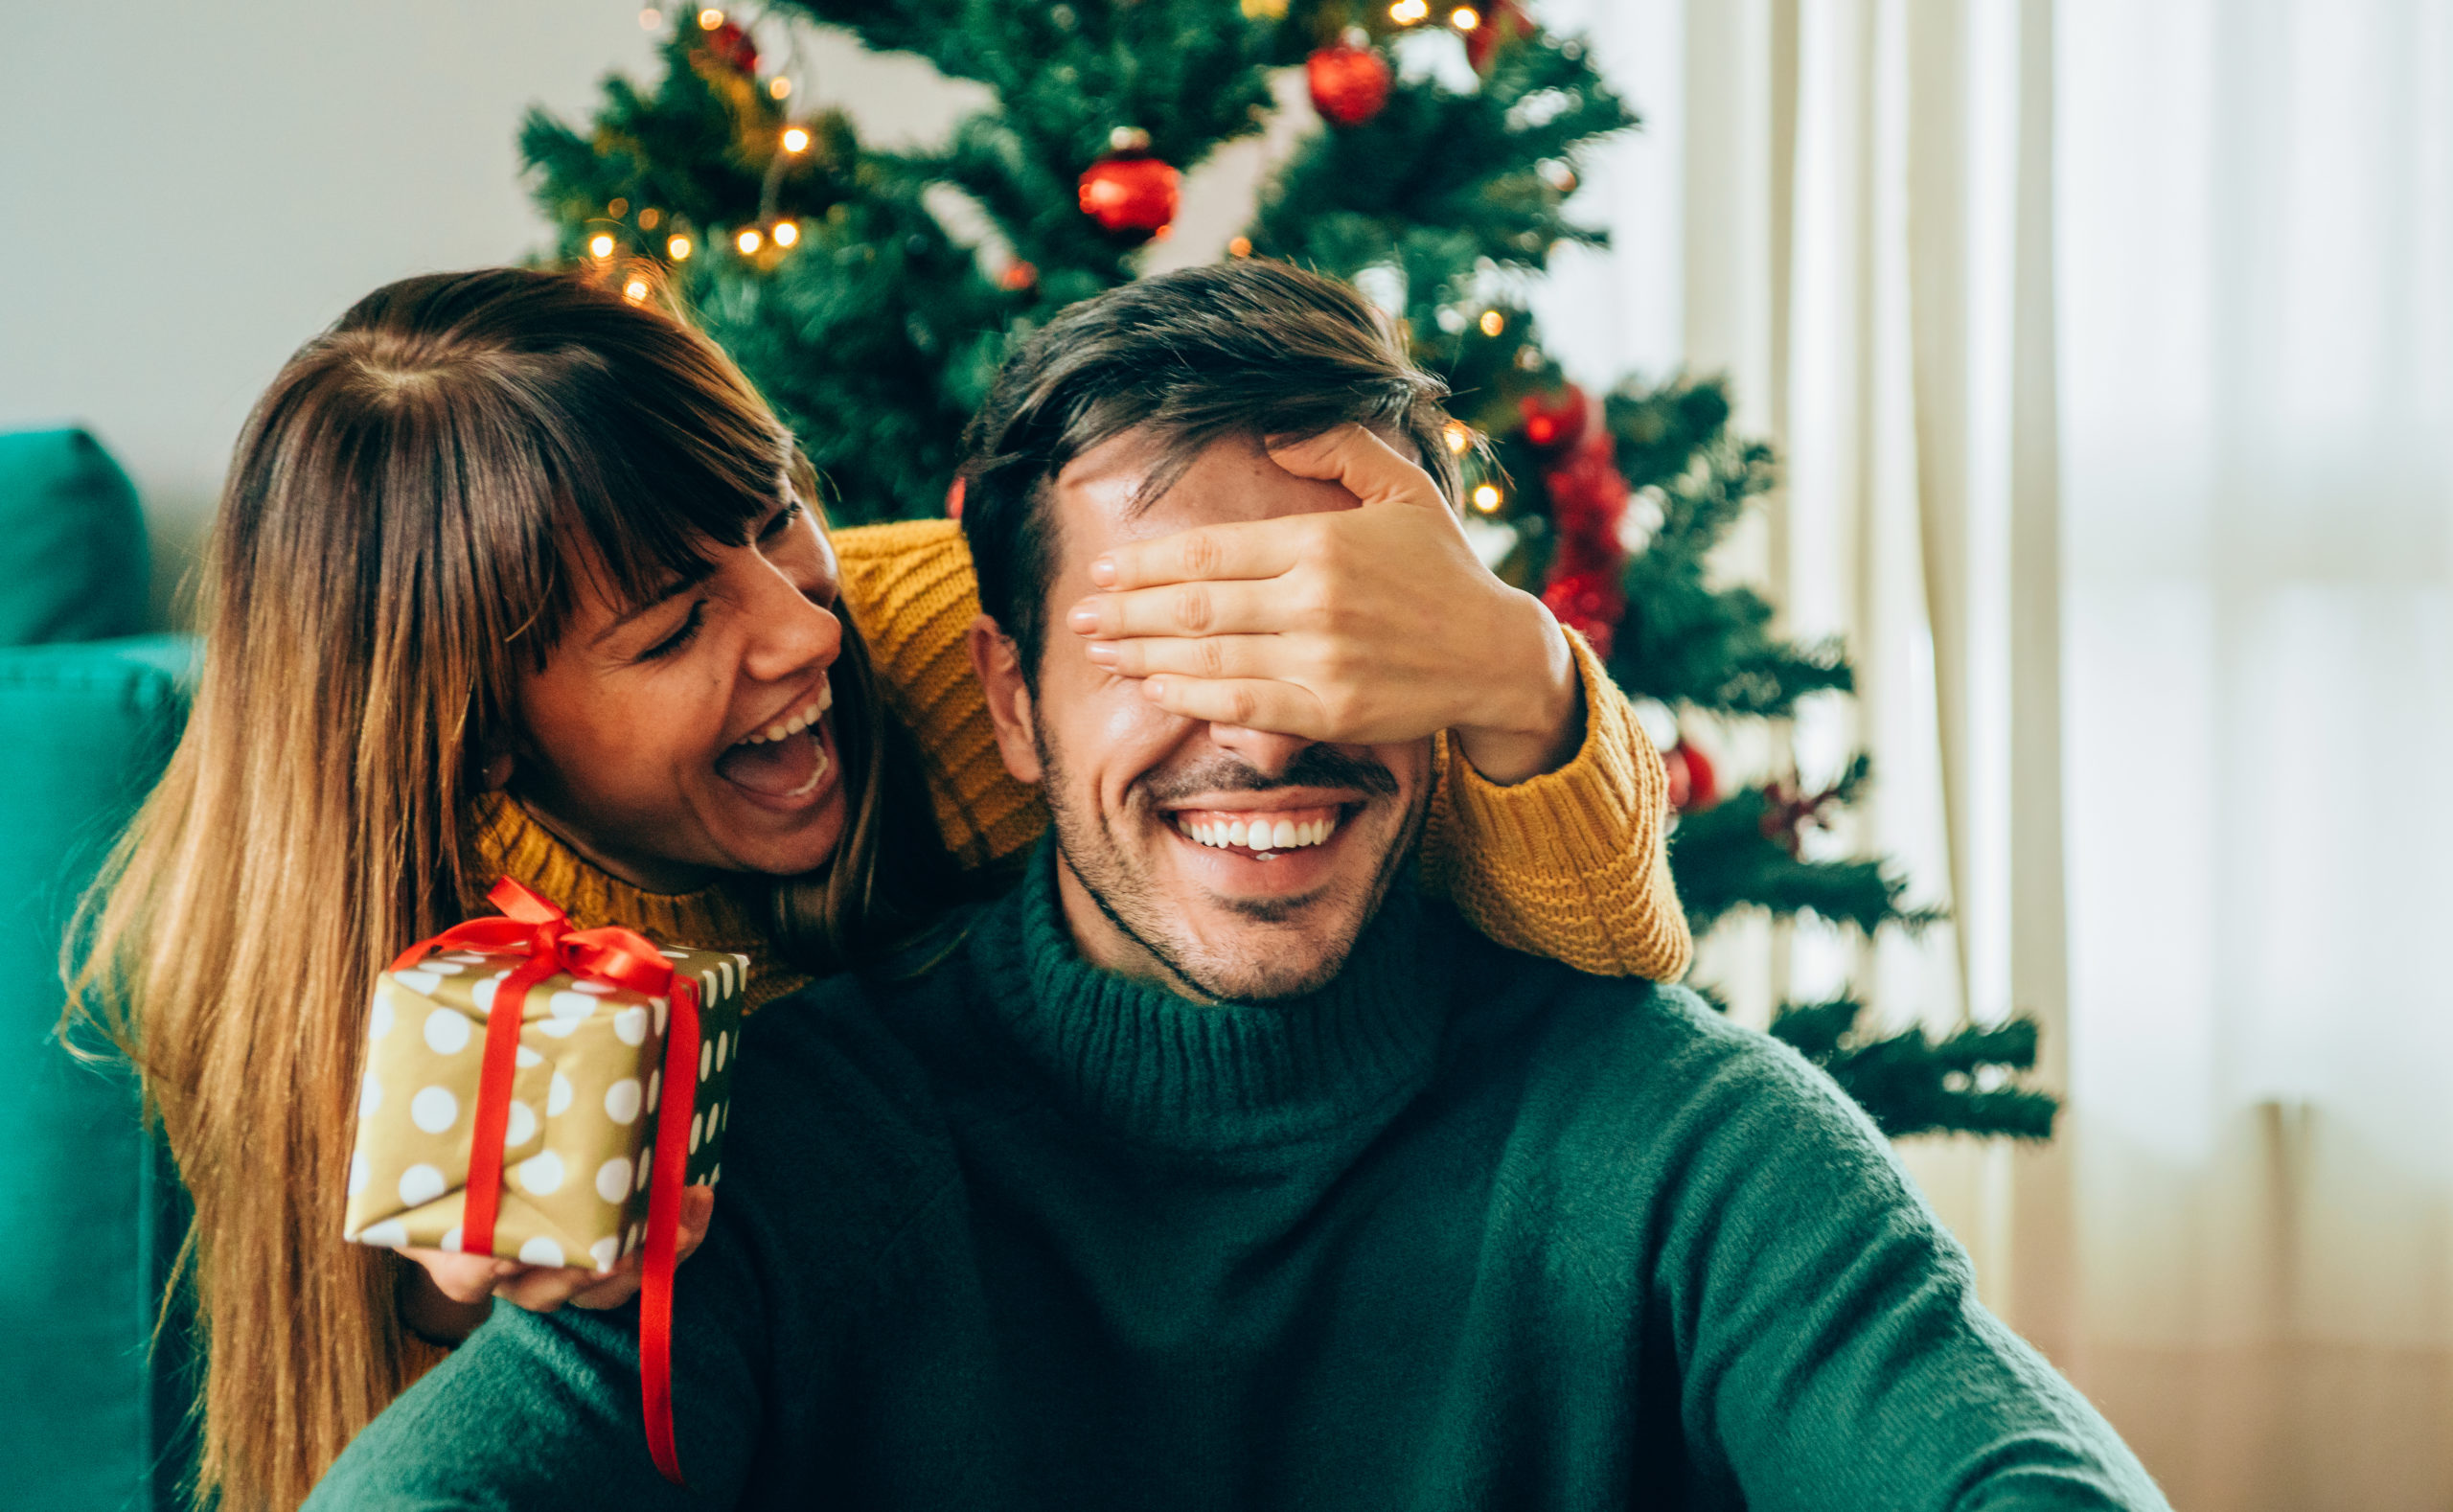 27 Cute Christmas Gift Ideas For Him And Her